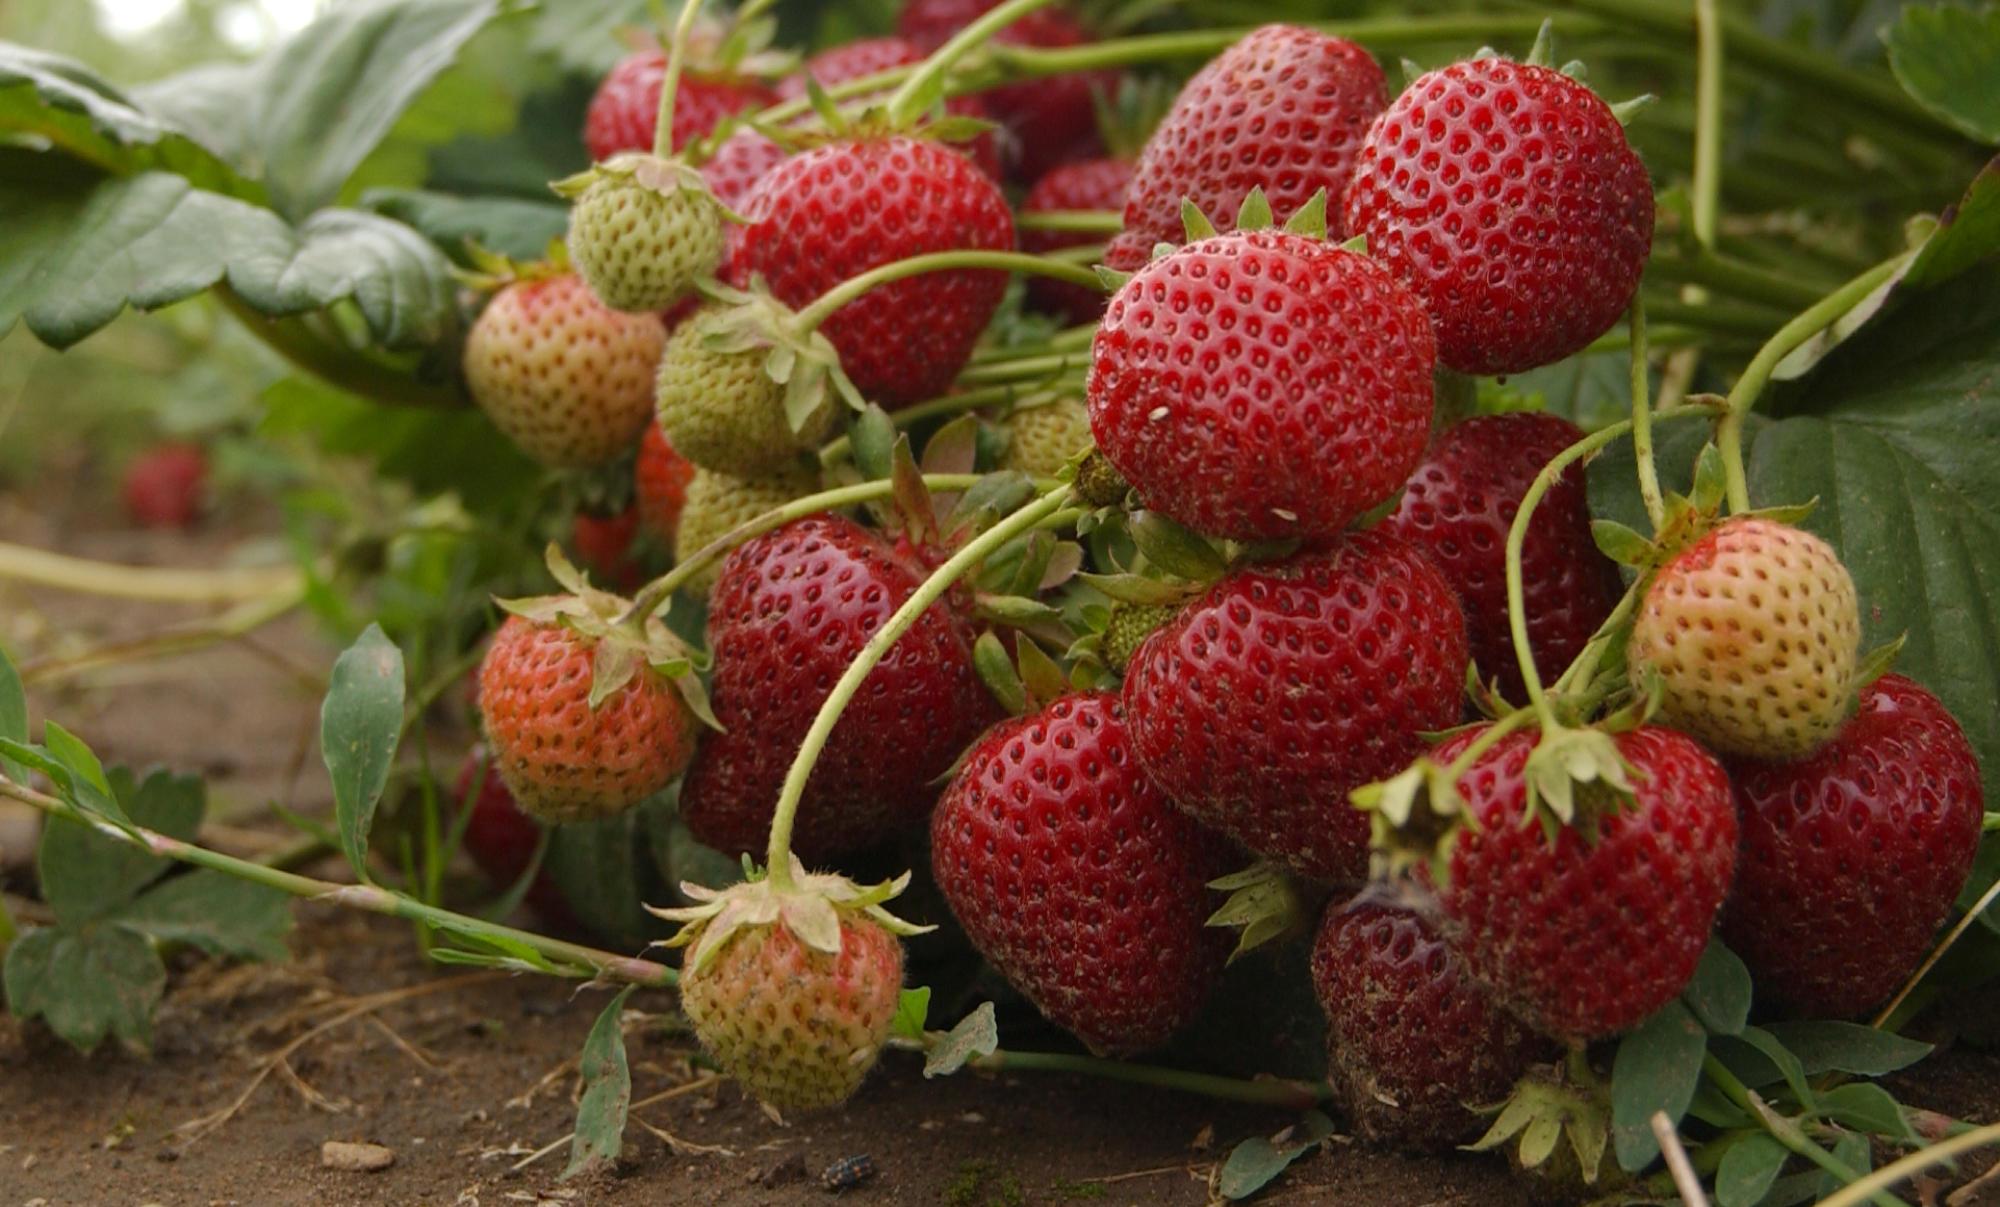 Yard and Garden: Properly Mulch Strawberries for Winter